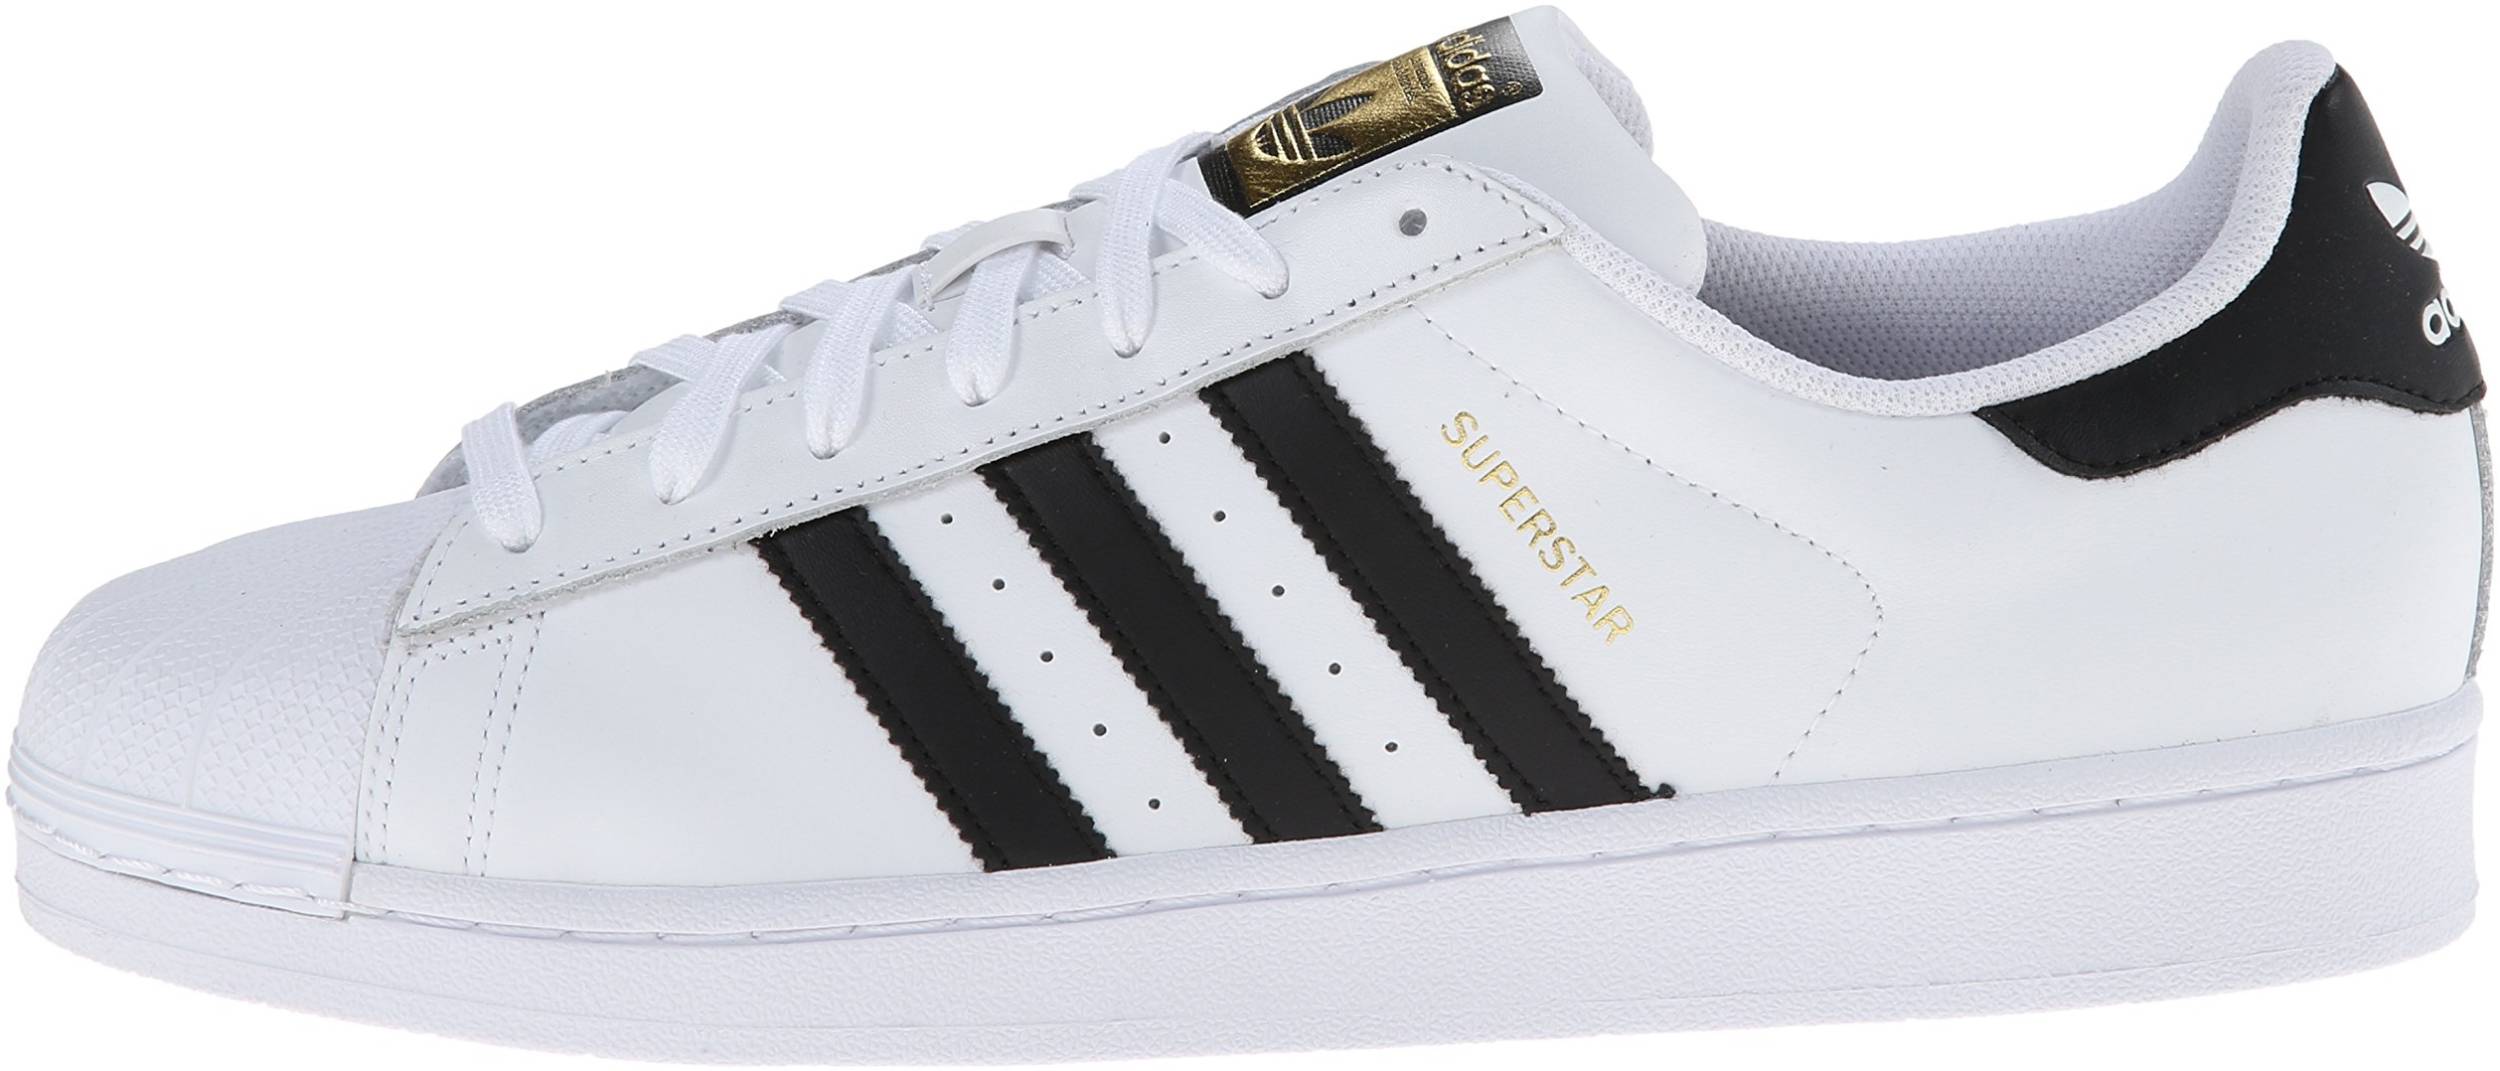 Save 65% on Adidas Superstar Sneakers 